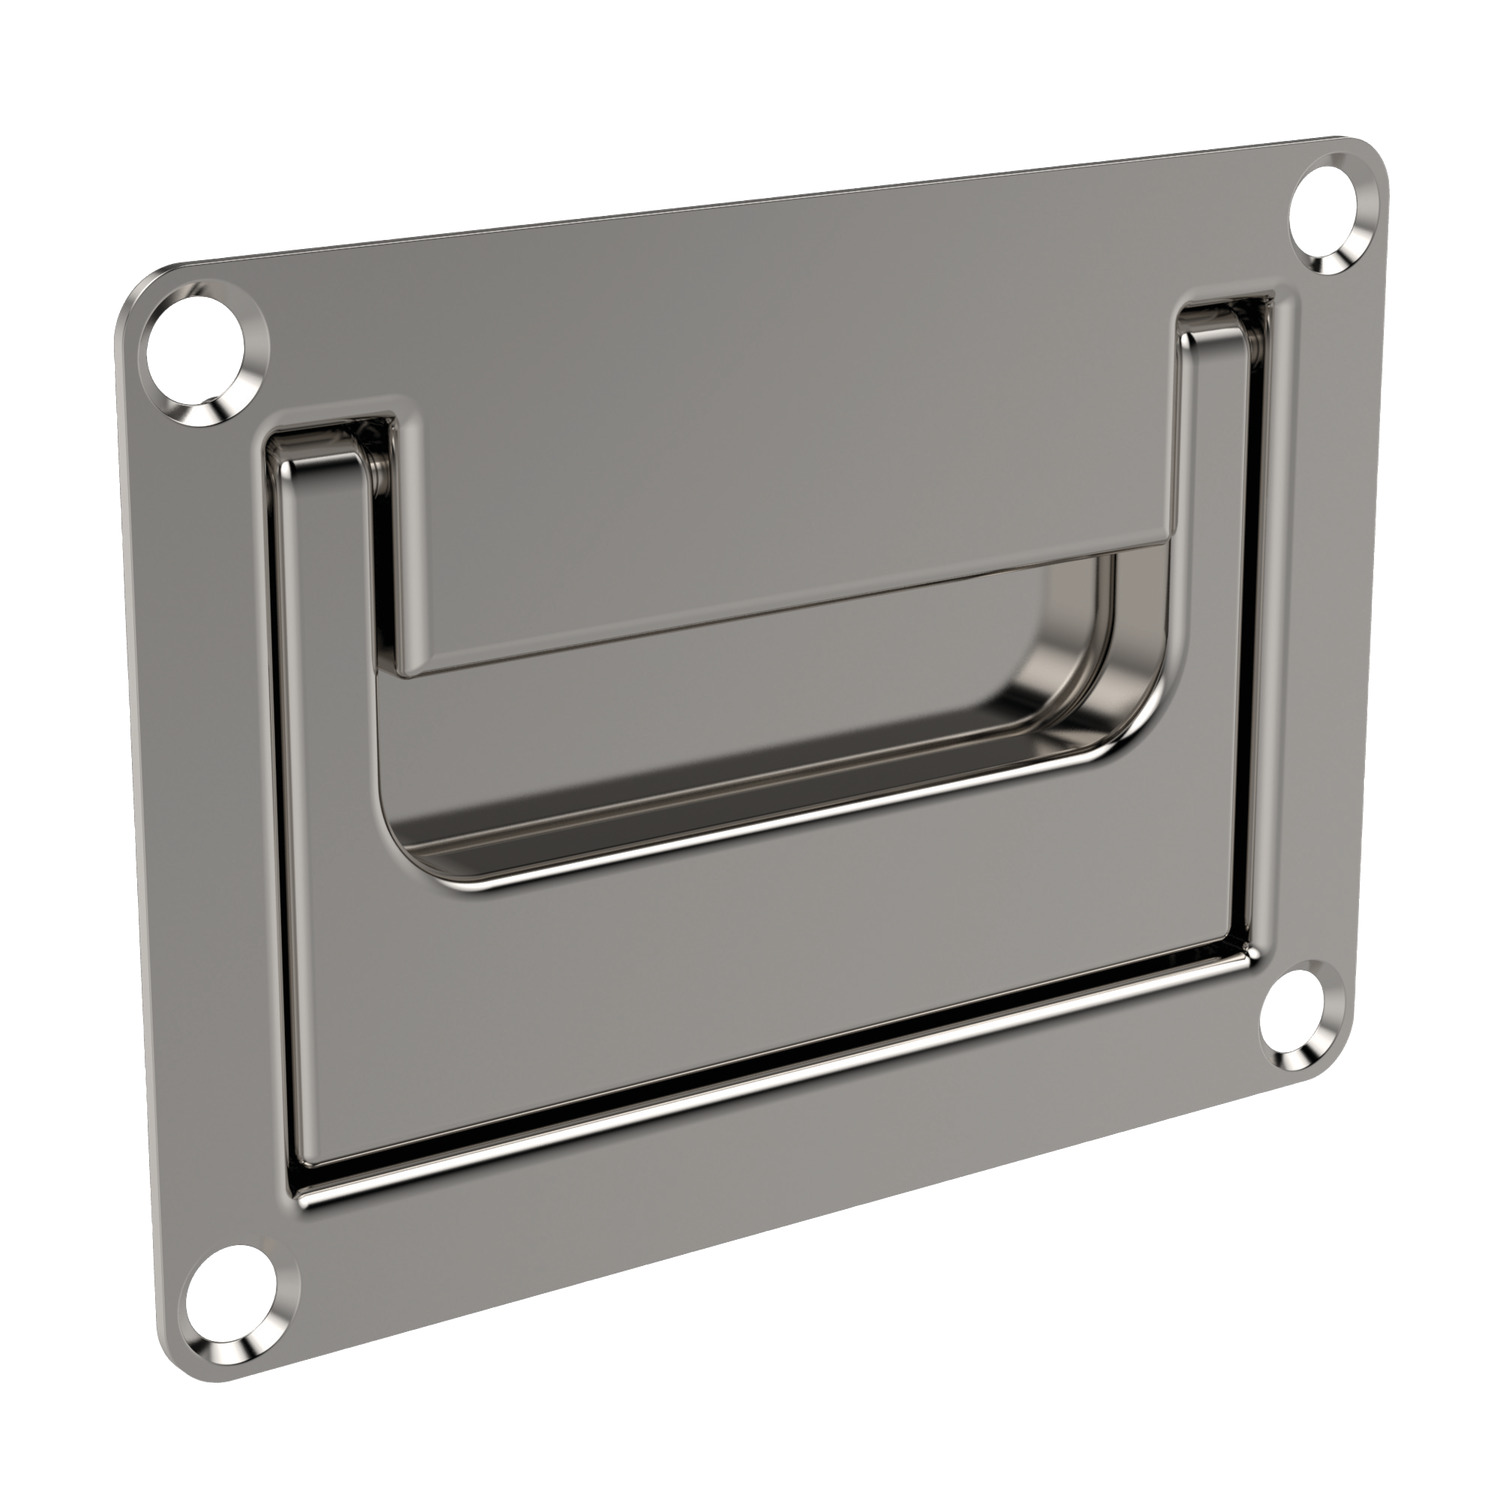 Product 79540, Tray Handle, Collapsible stainless steel / 